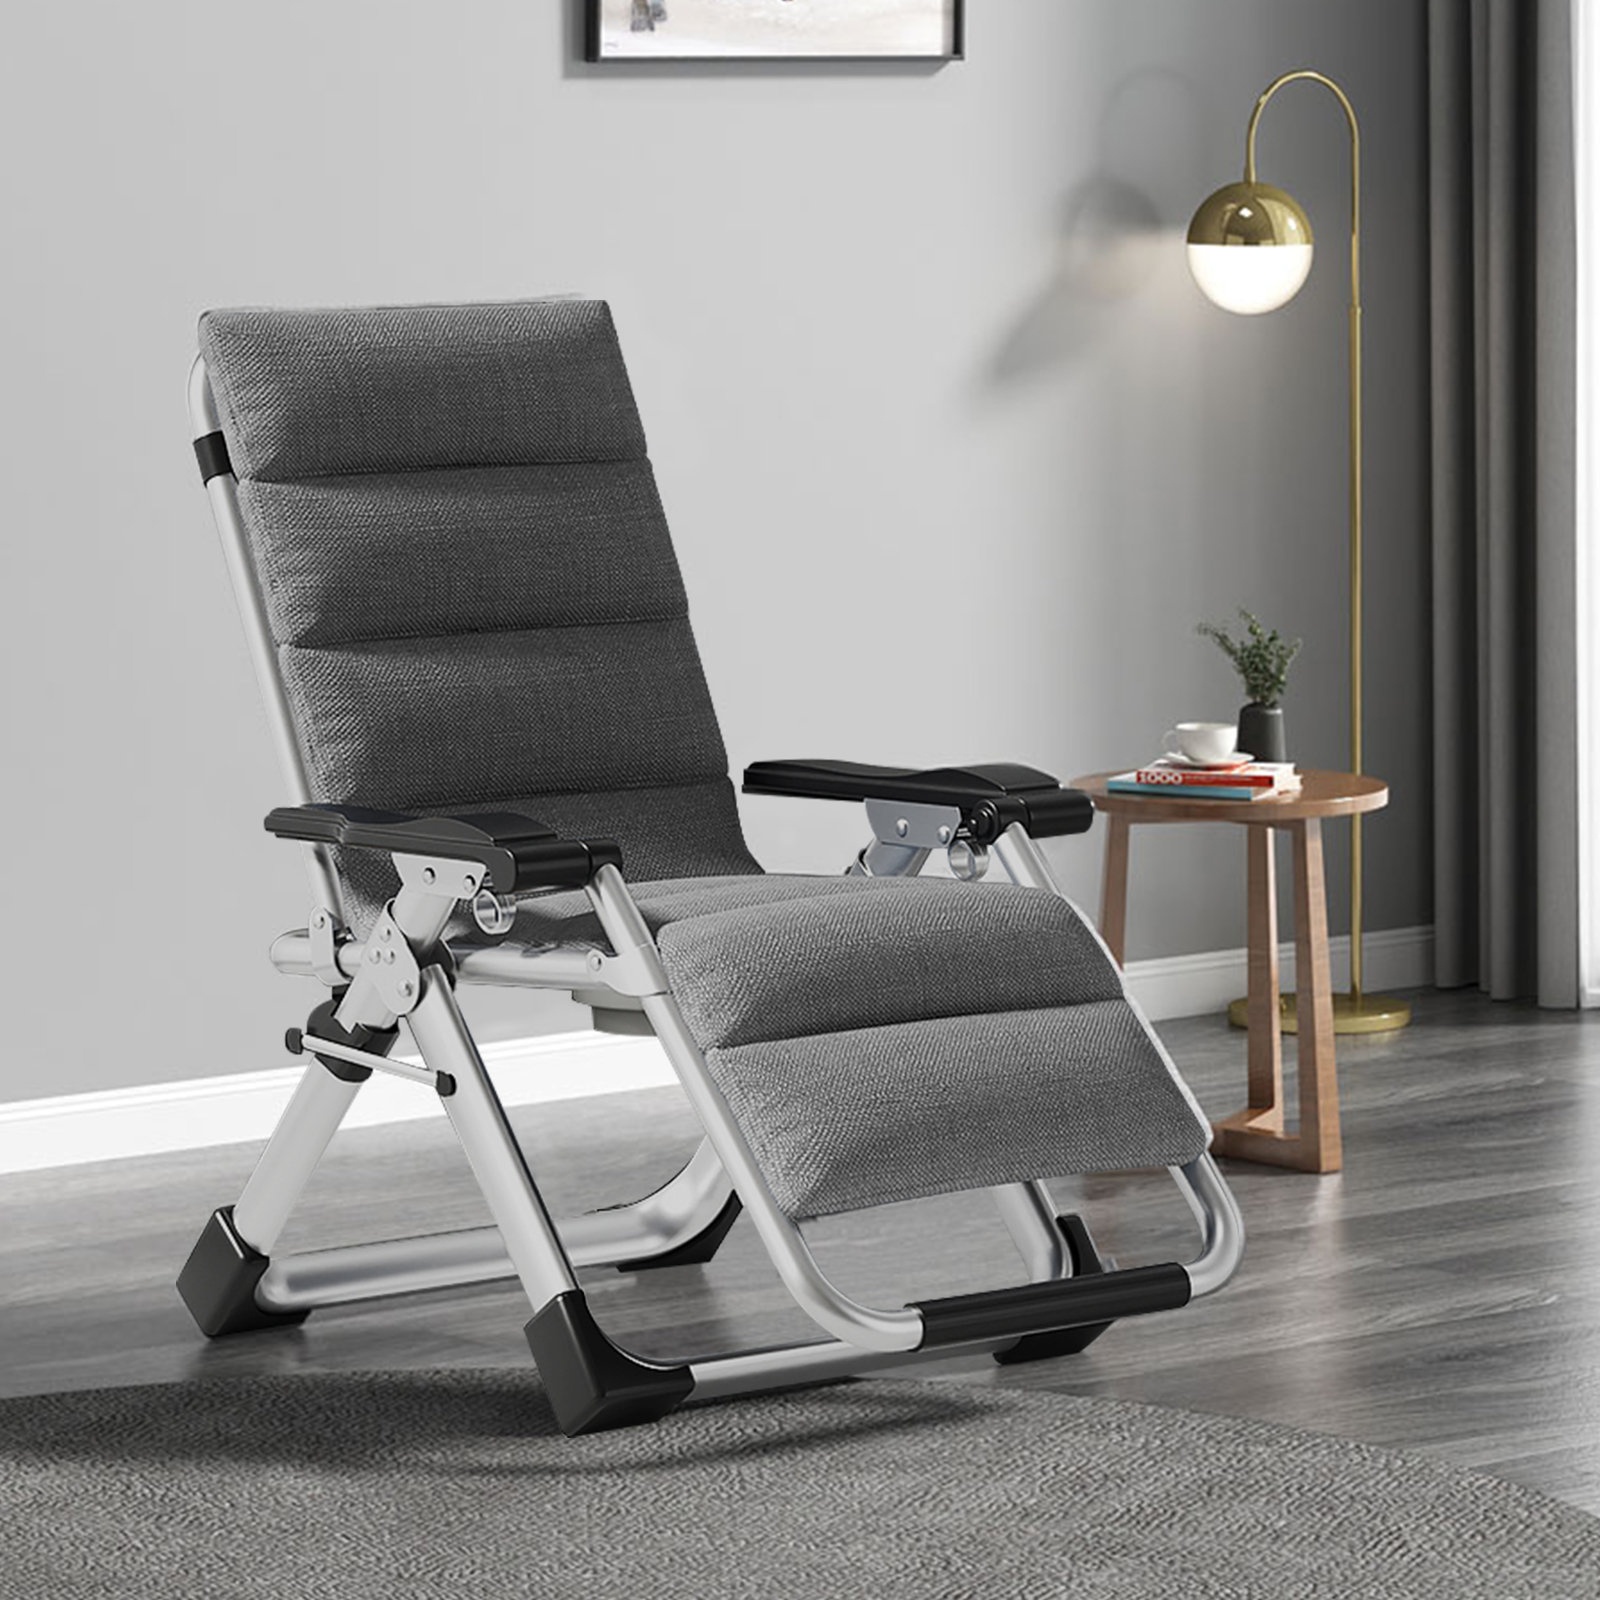 Lounge Chairs For Bedroom - VisualHunt